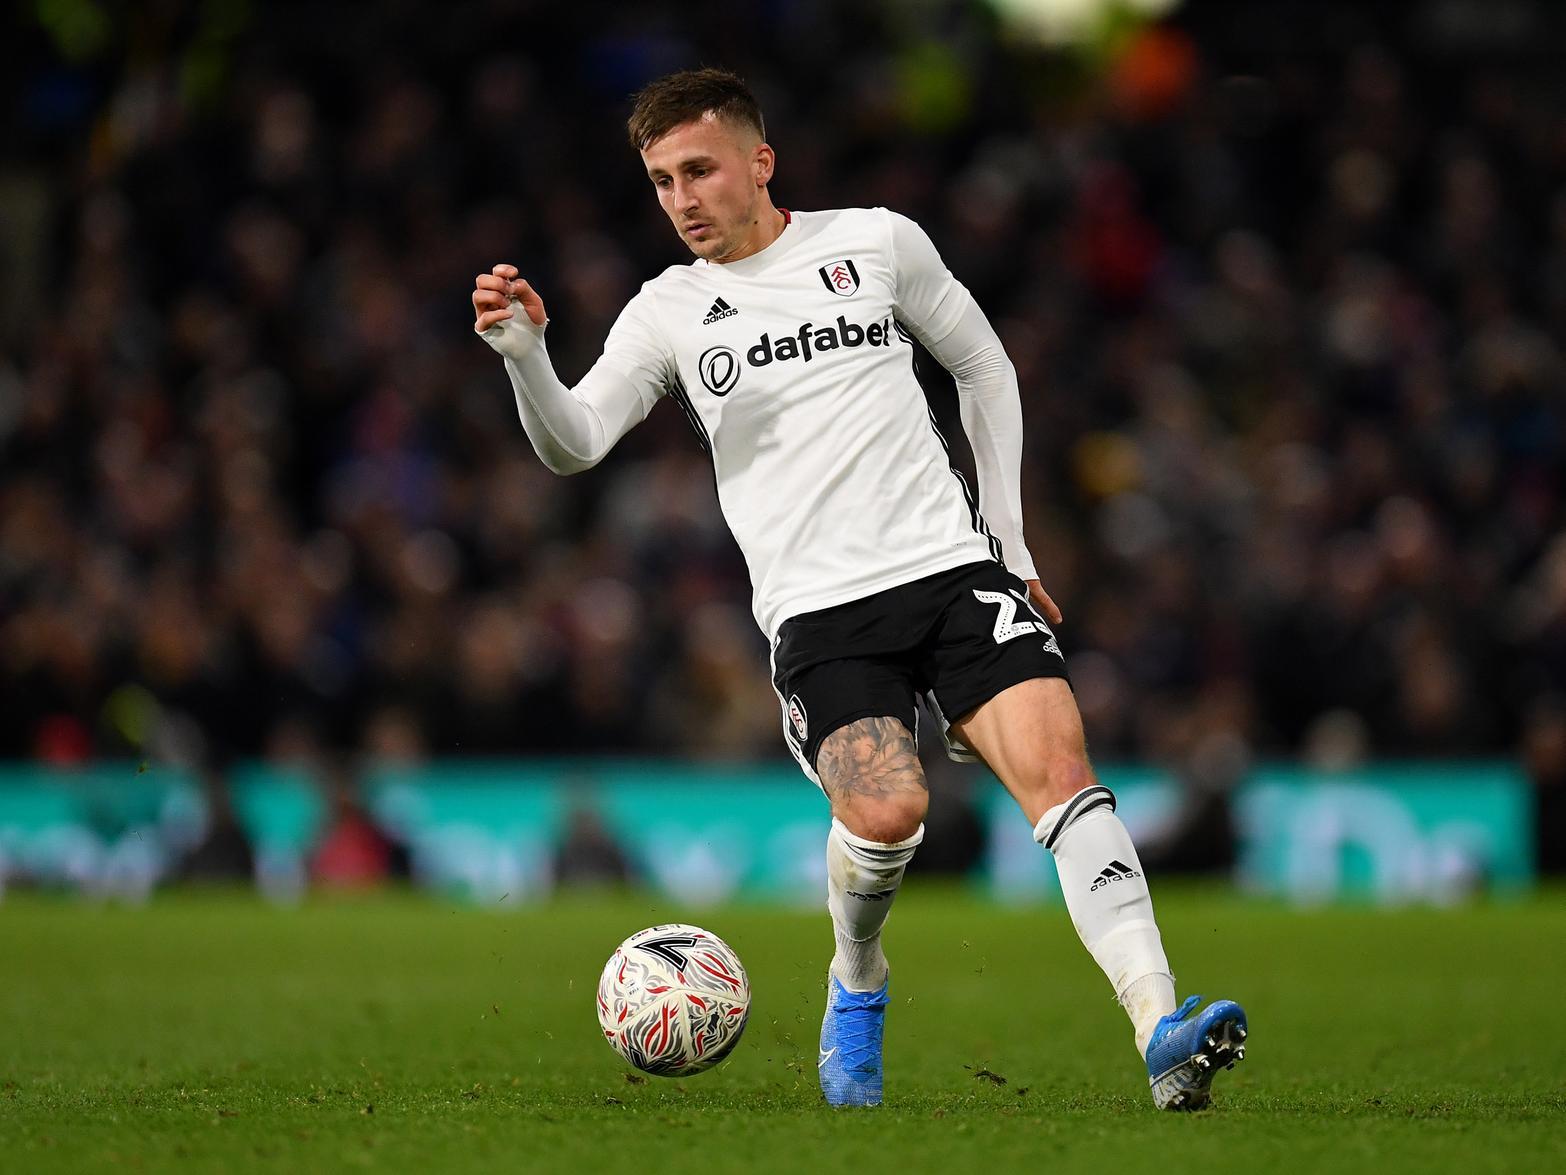 Southampton are believed to have joined Watford in the race to land Fulham defender Joe Bryan, as both sides look to strengthen in the full-back position. (The 72)